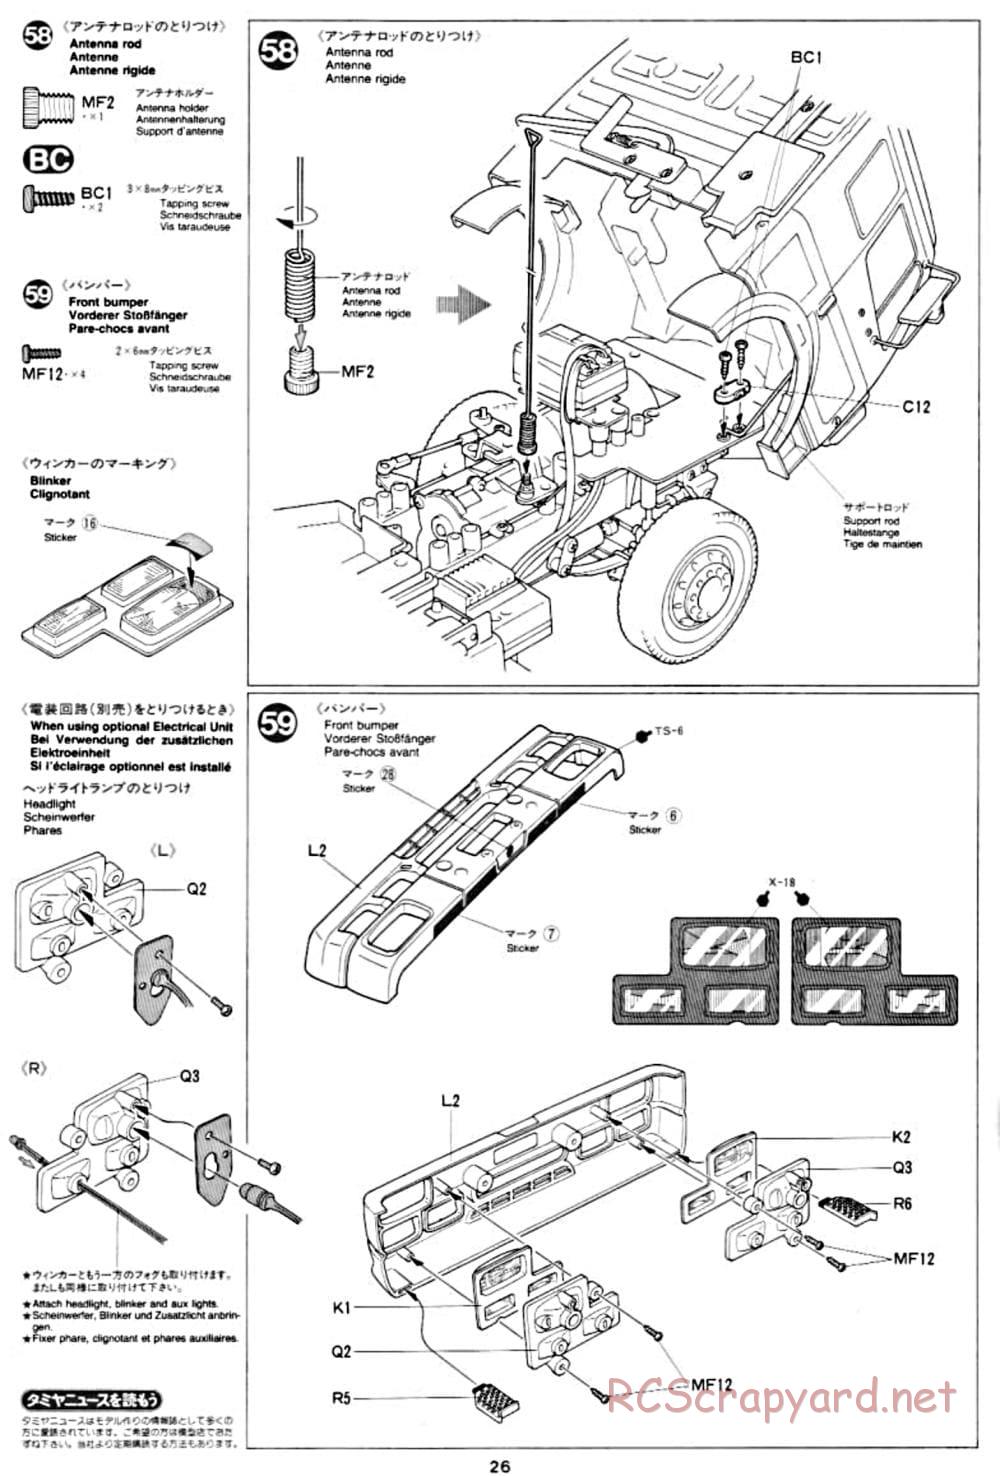 Tamiya - Mercedes-Benz 1850L Delivery Truck - Manual - Page 26